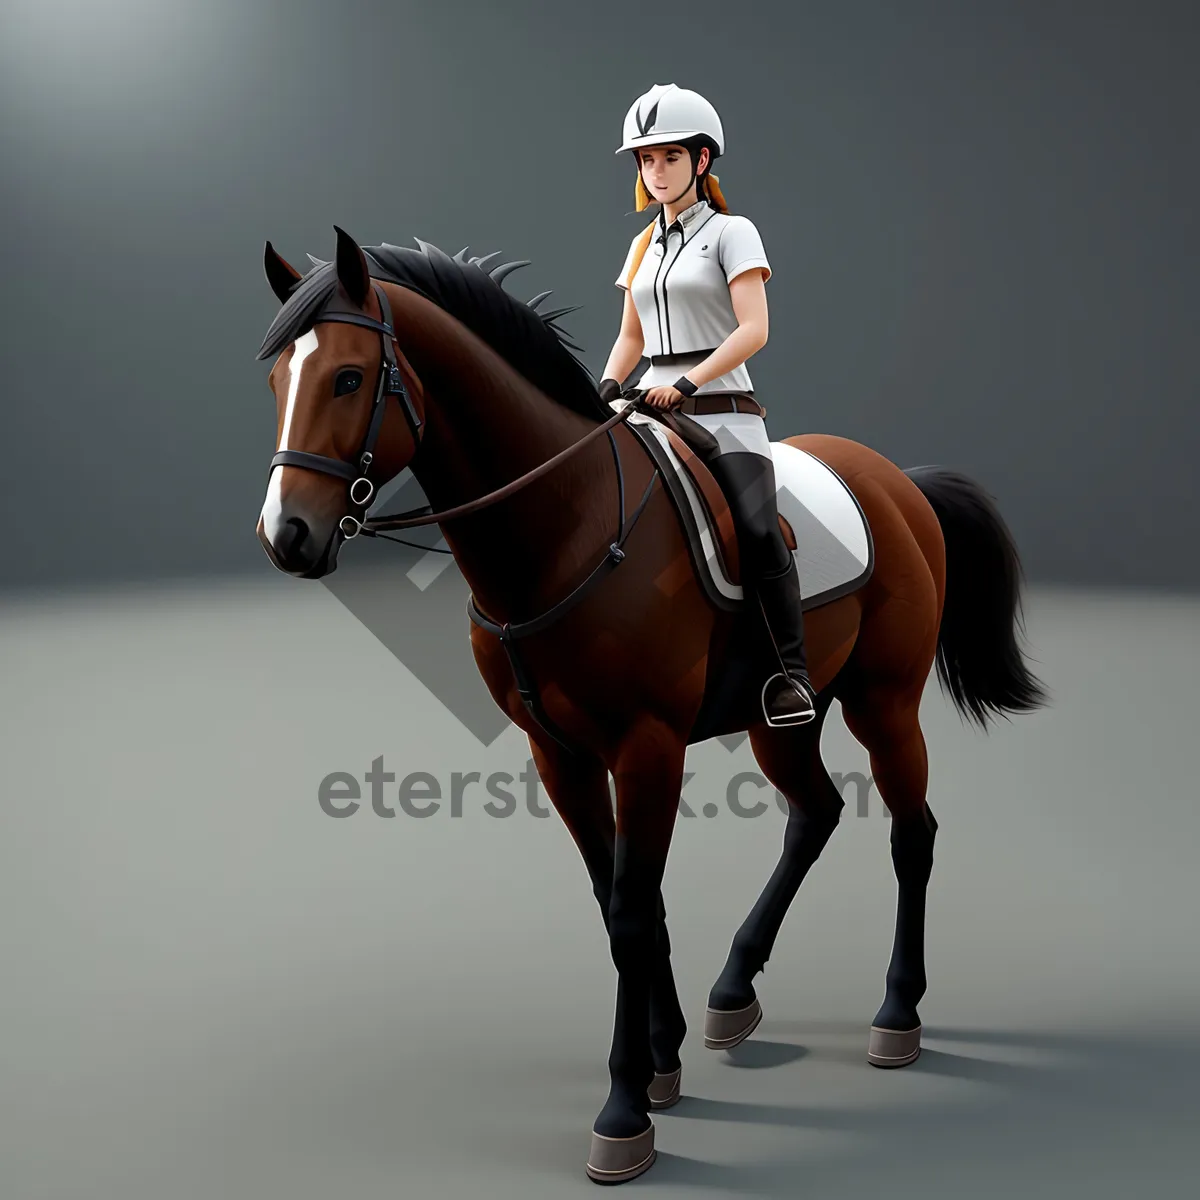 Picture of Stallion Harness: Supportive Equipment for Thoroughbred Equestrian Horse